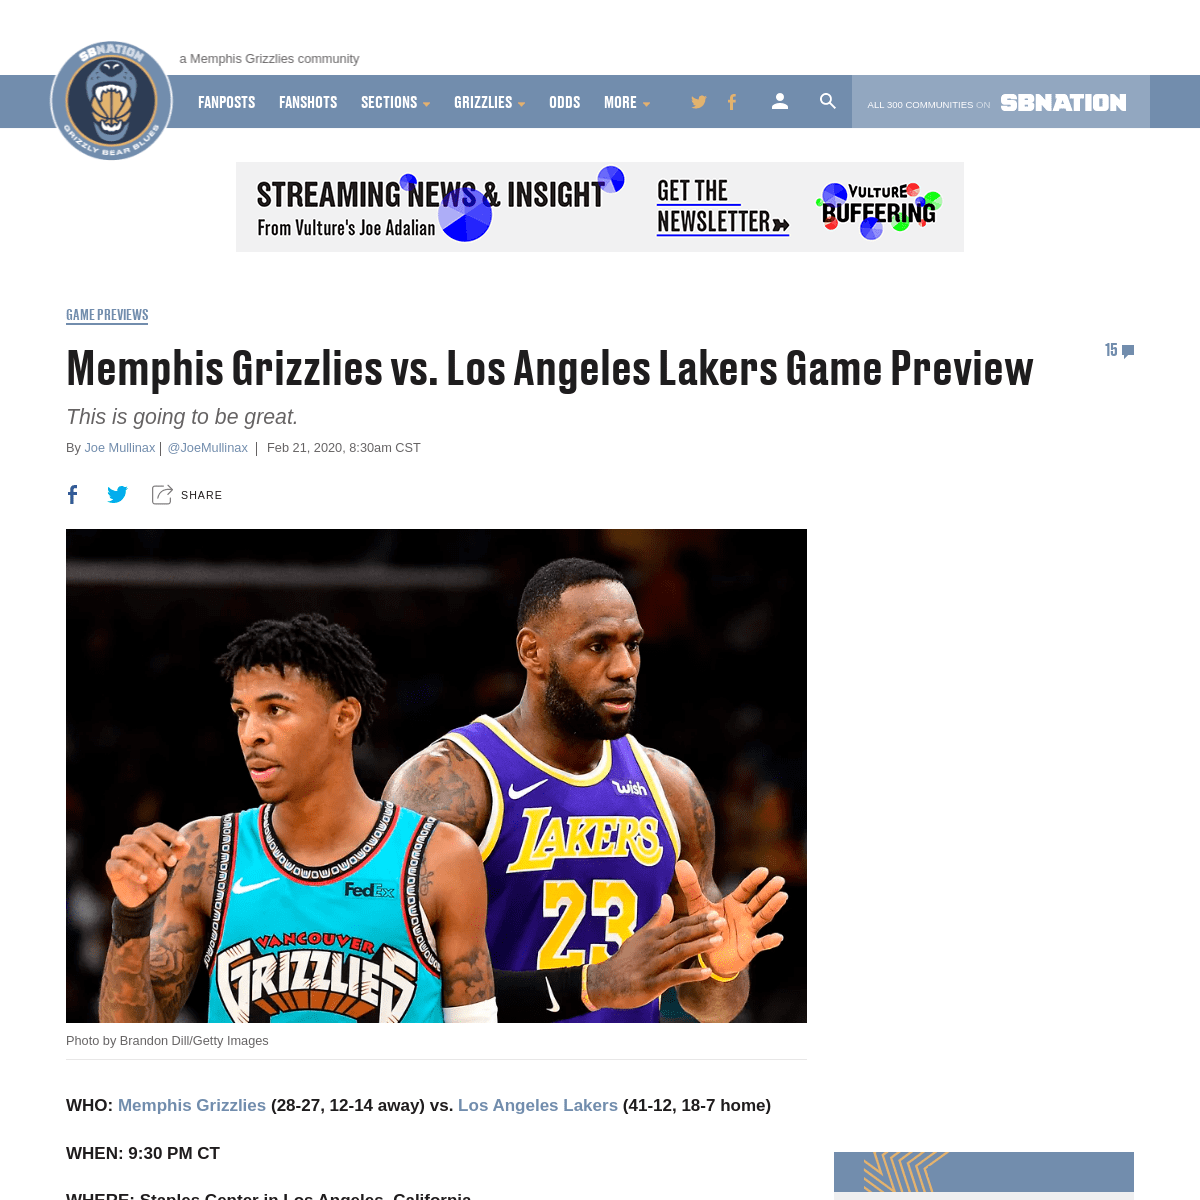 A complete backup of www.grizzlybearblues.com/2020/2/21/21146837/memphis-grizzlies-vs-los-angeles-lakers-game-preview-nba-start-